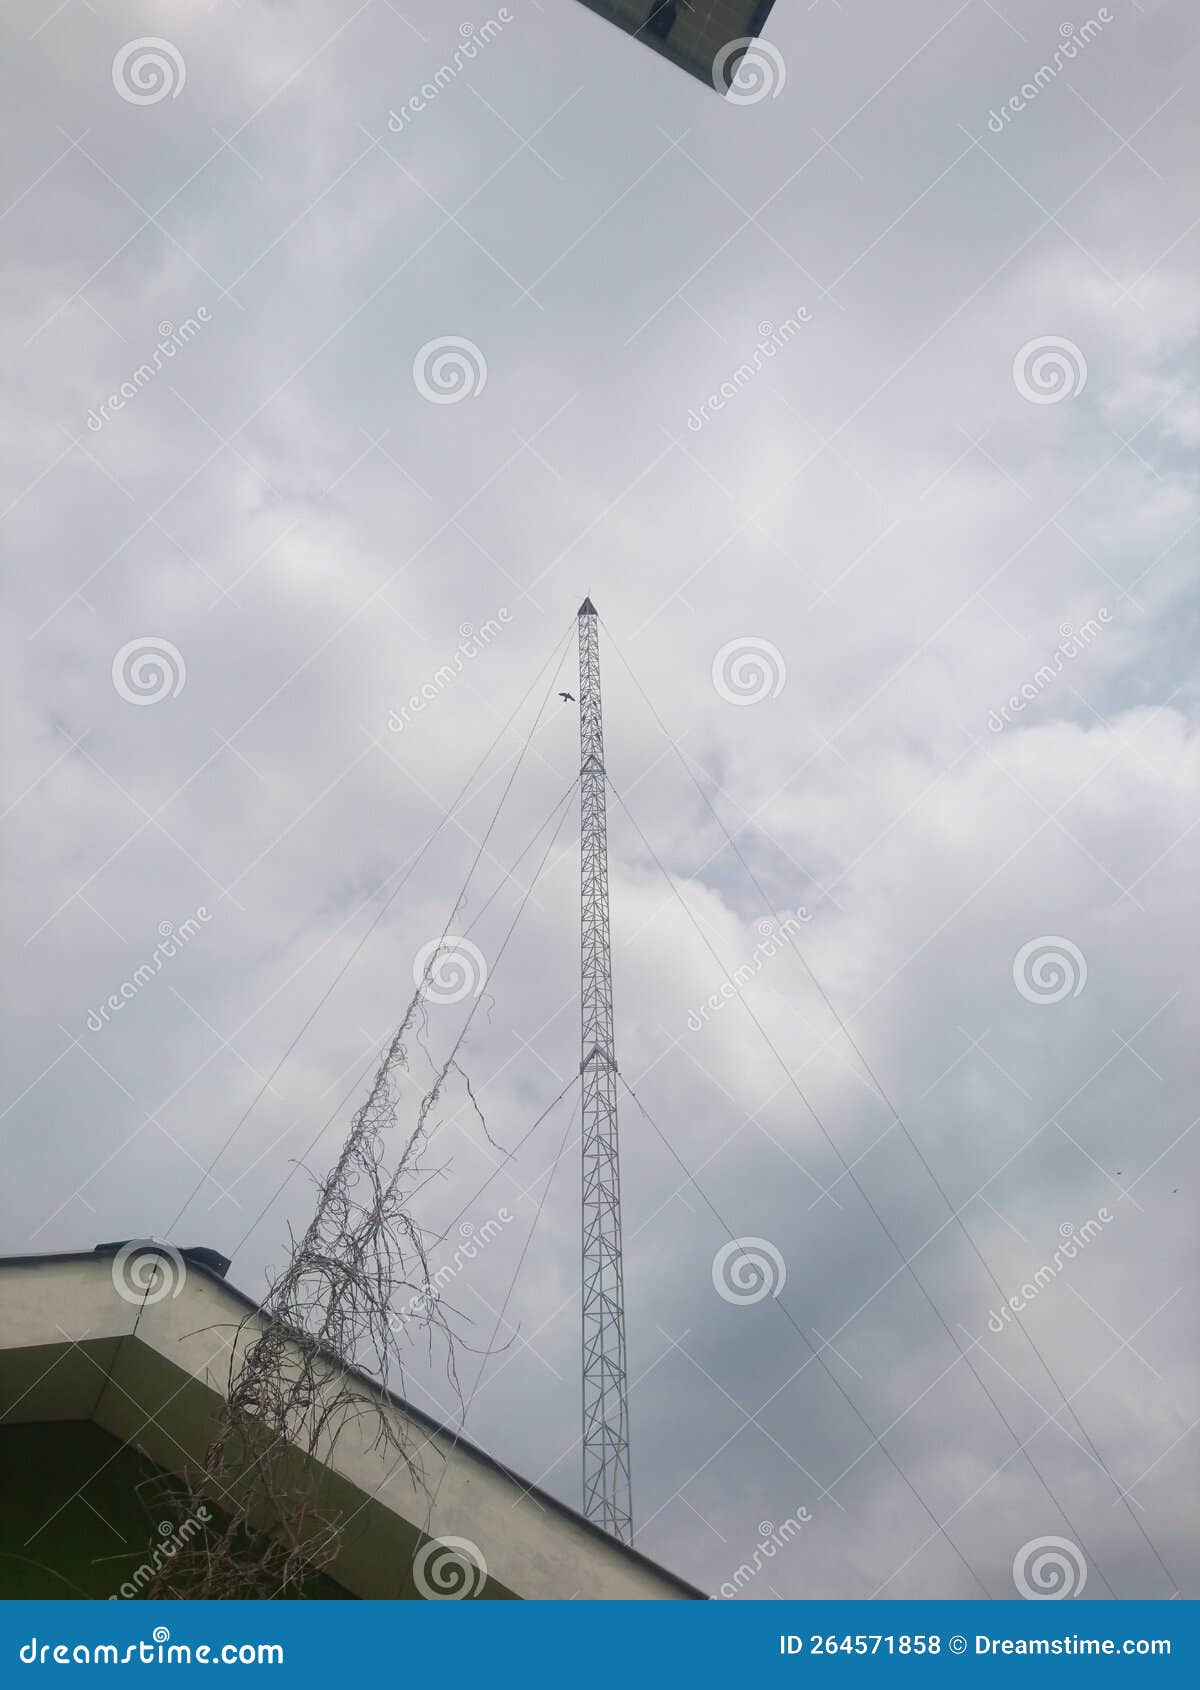 the antenne and a bird